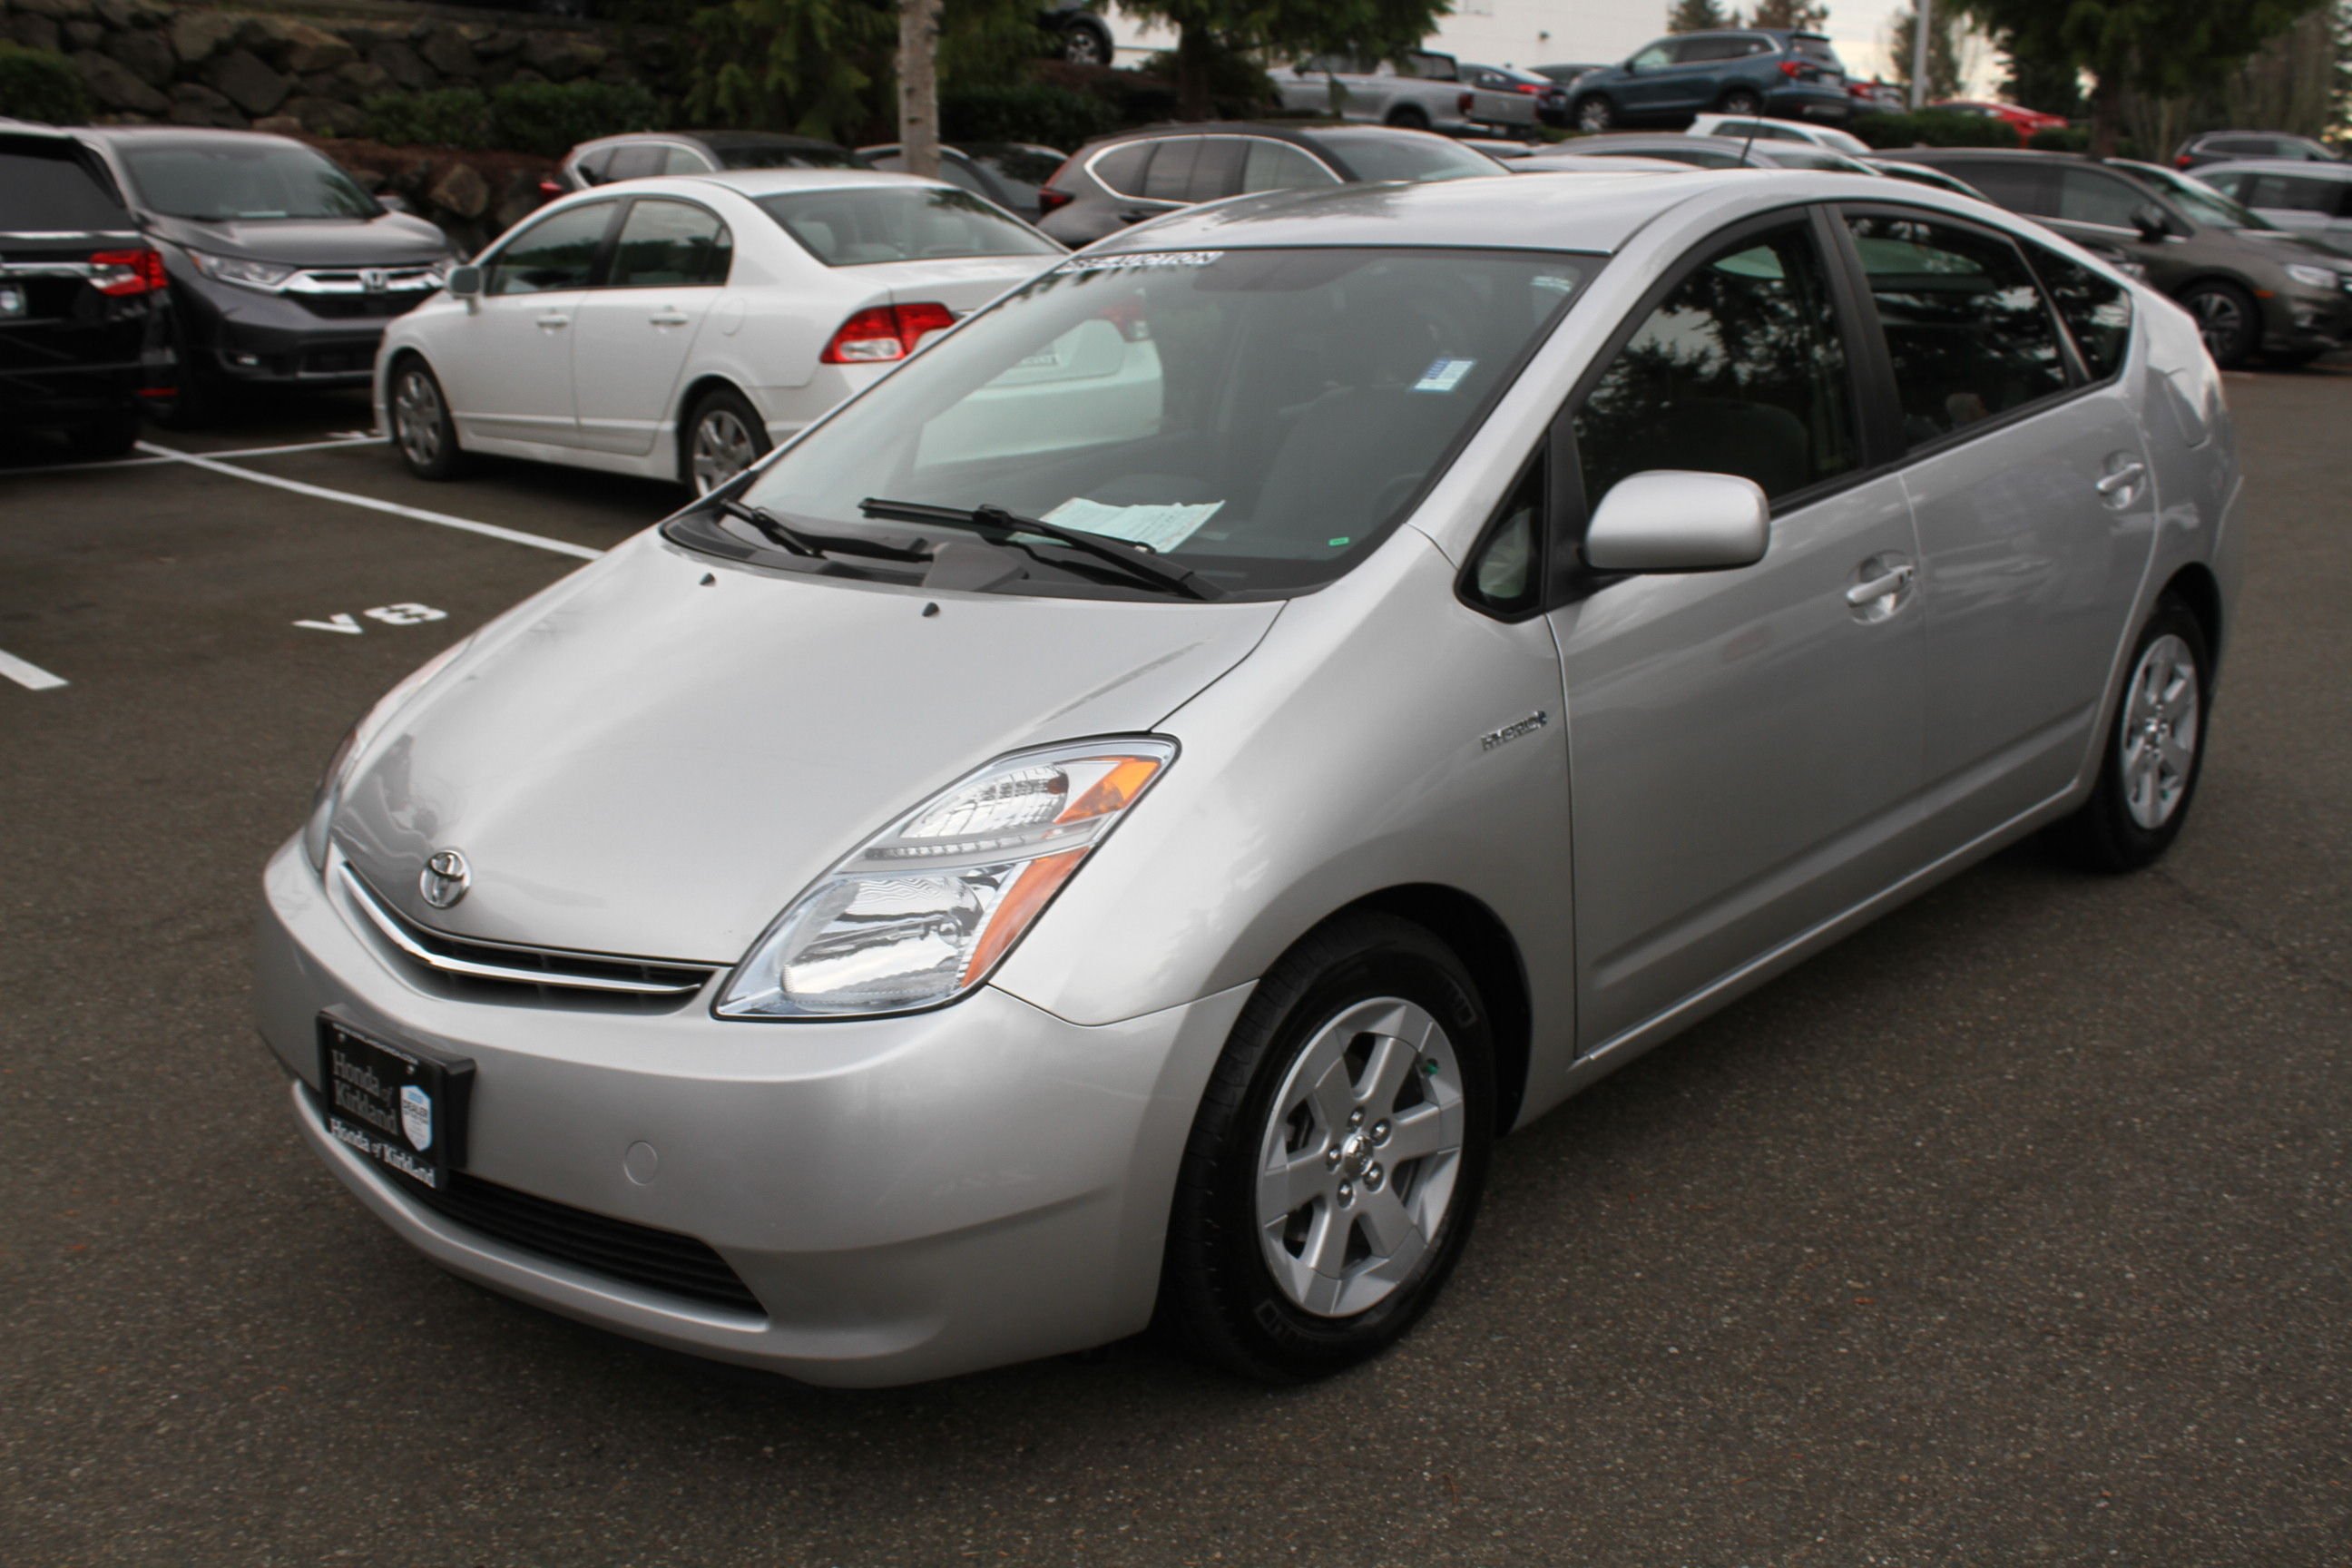 PreOwned 2007 Toyota Prius BASE 4dr Car in Kirkland